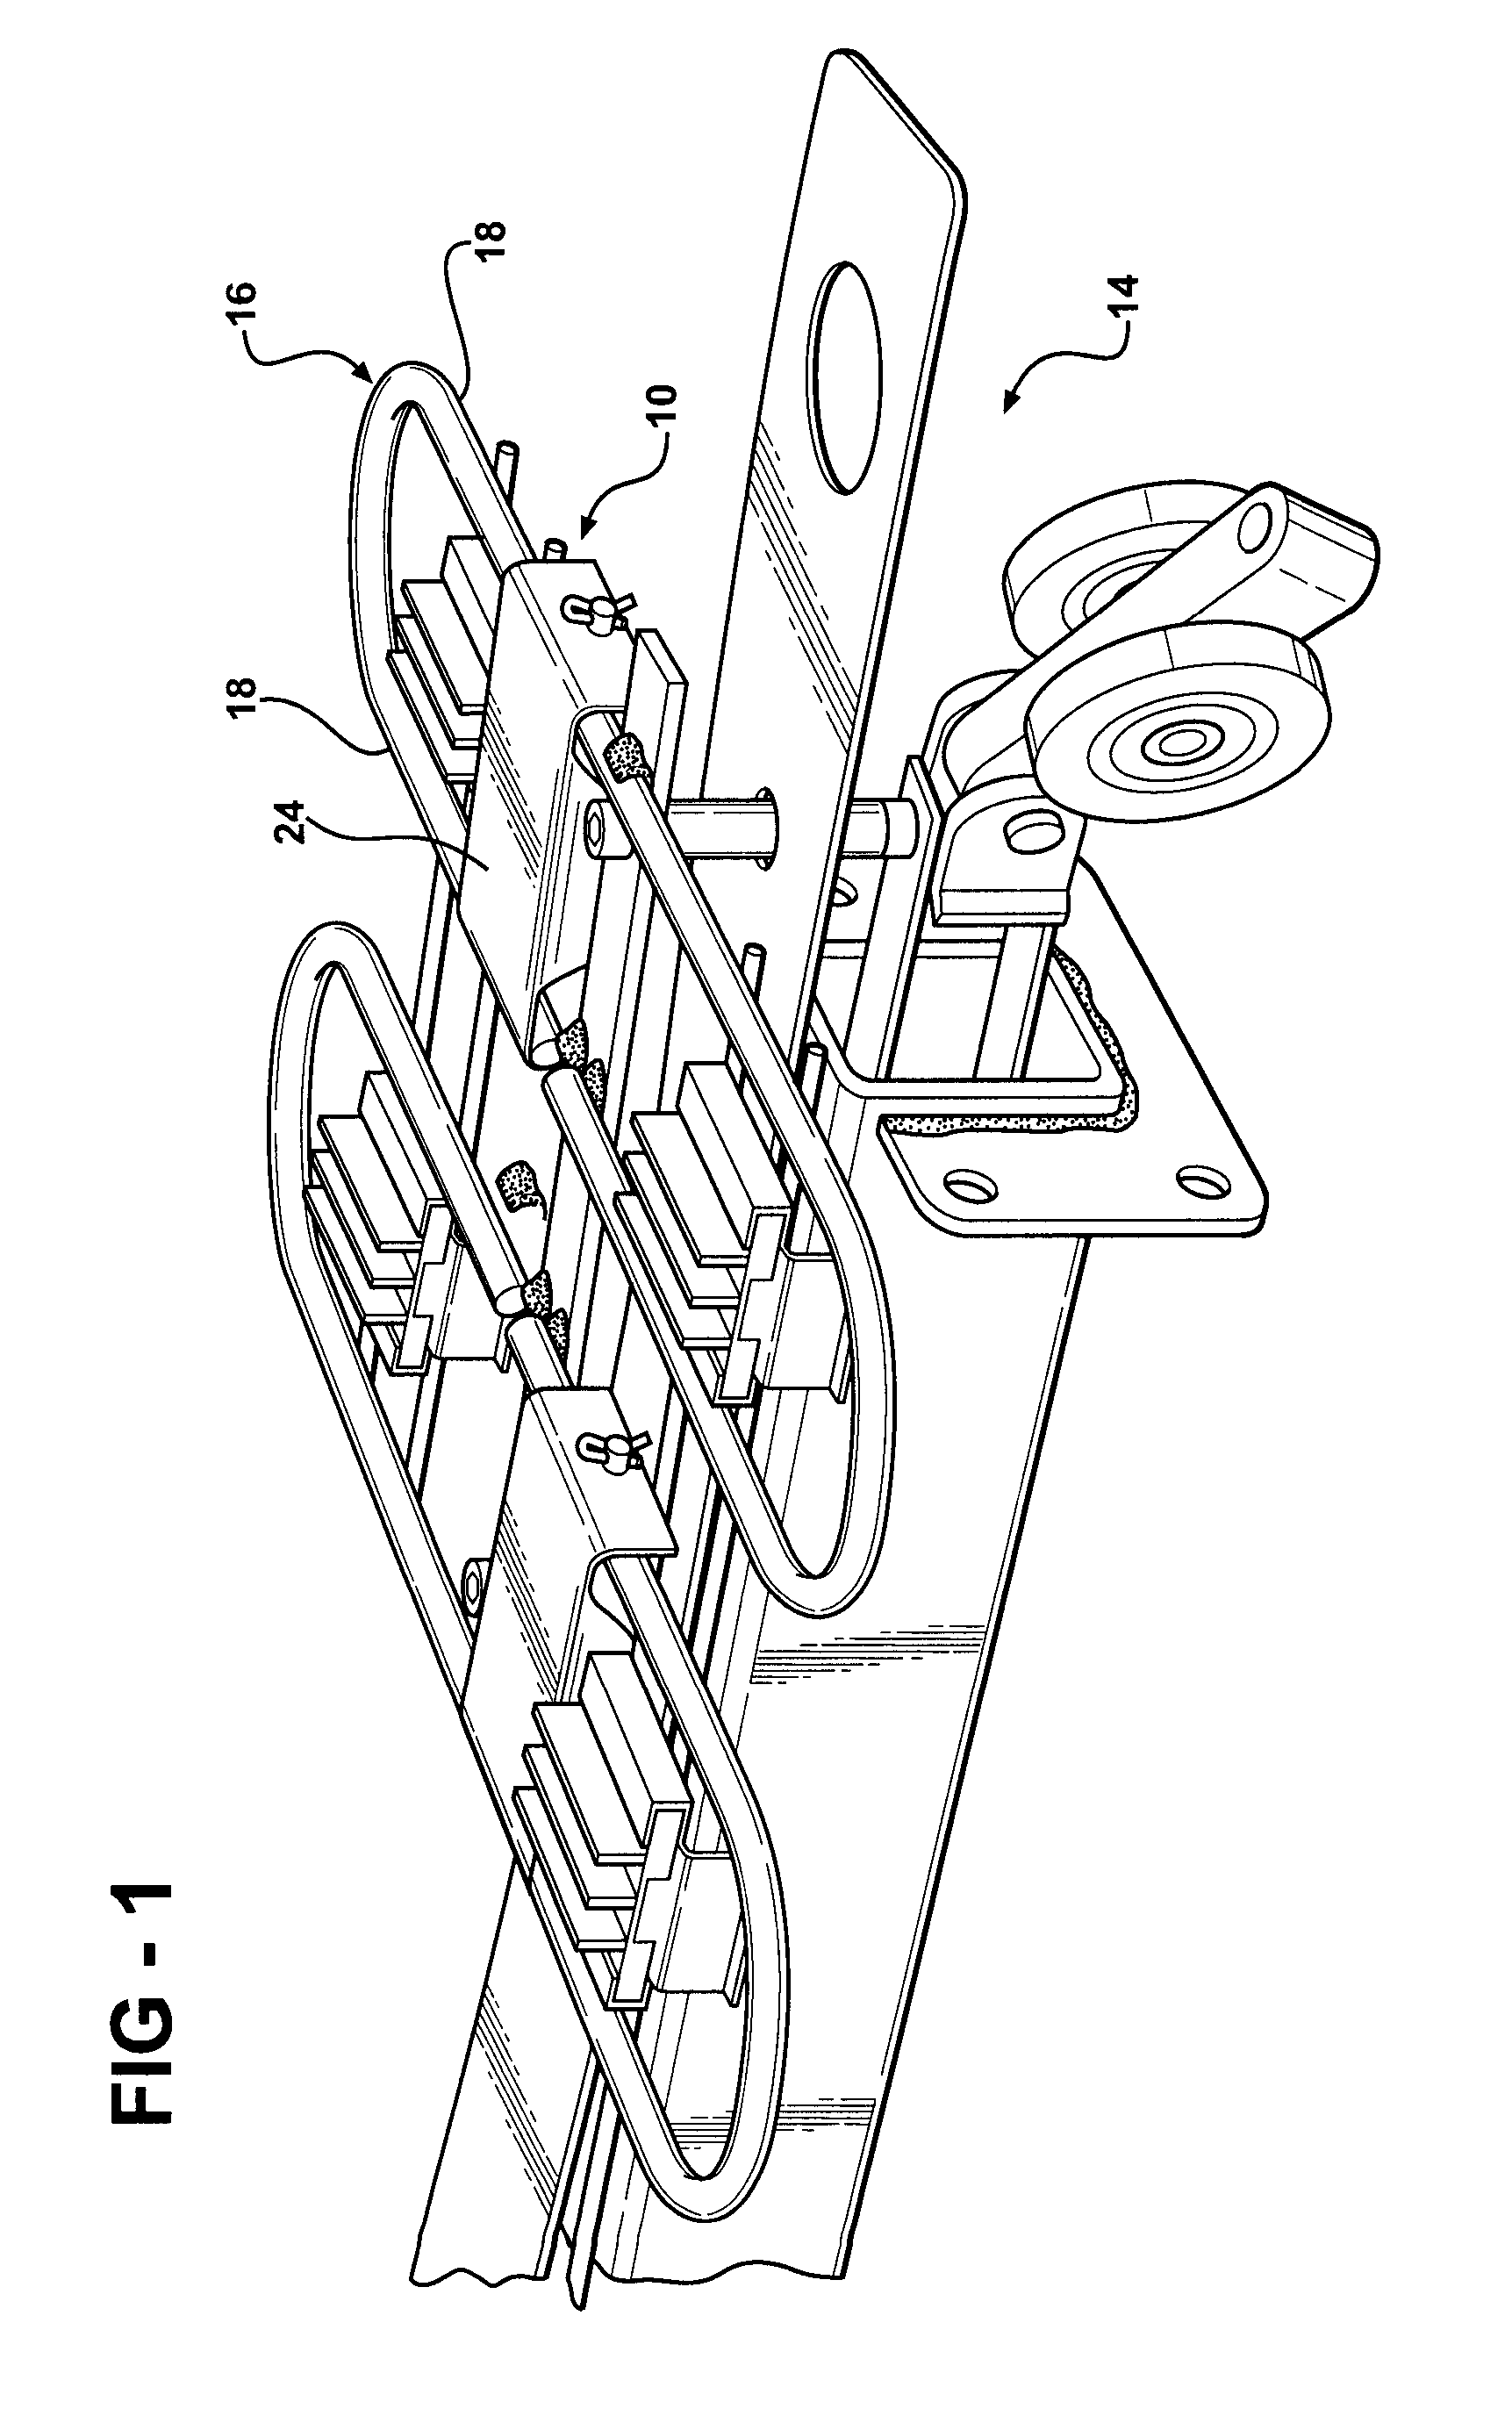 Magnet assembly for a conveyor system